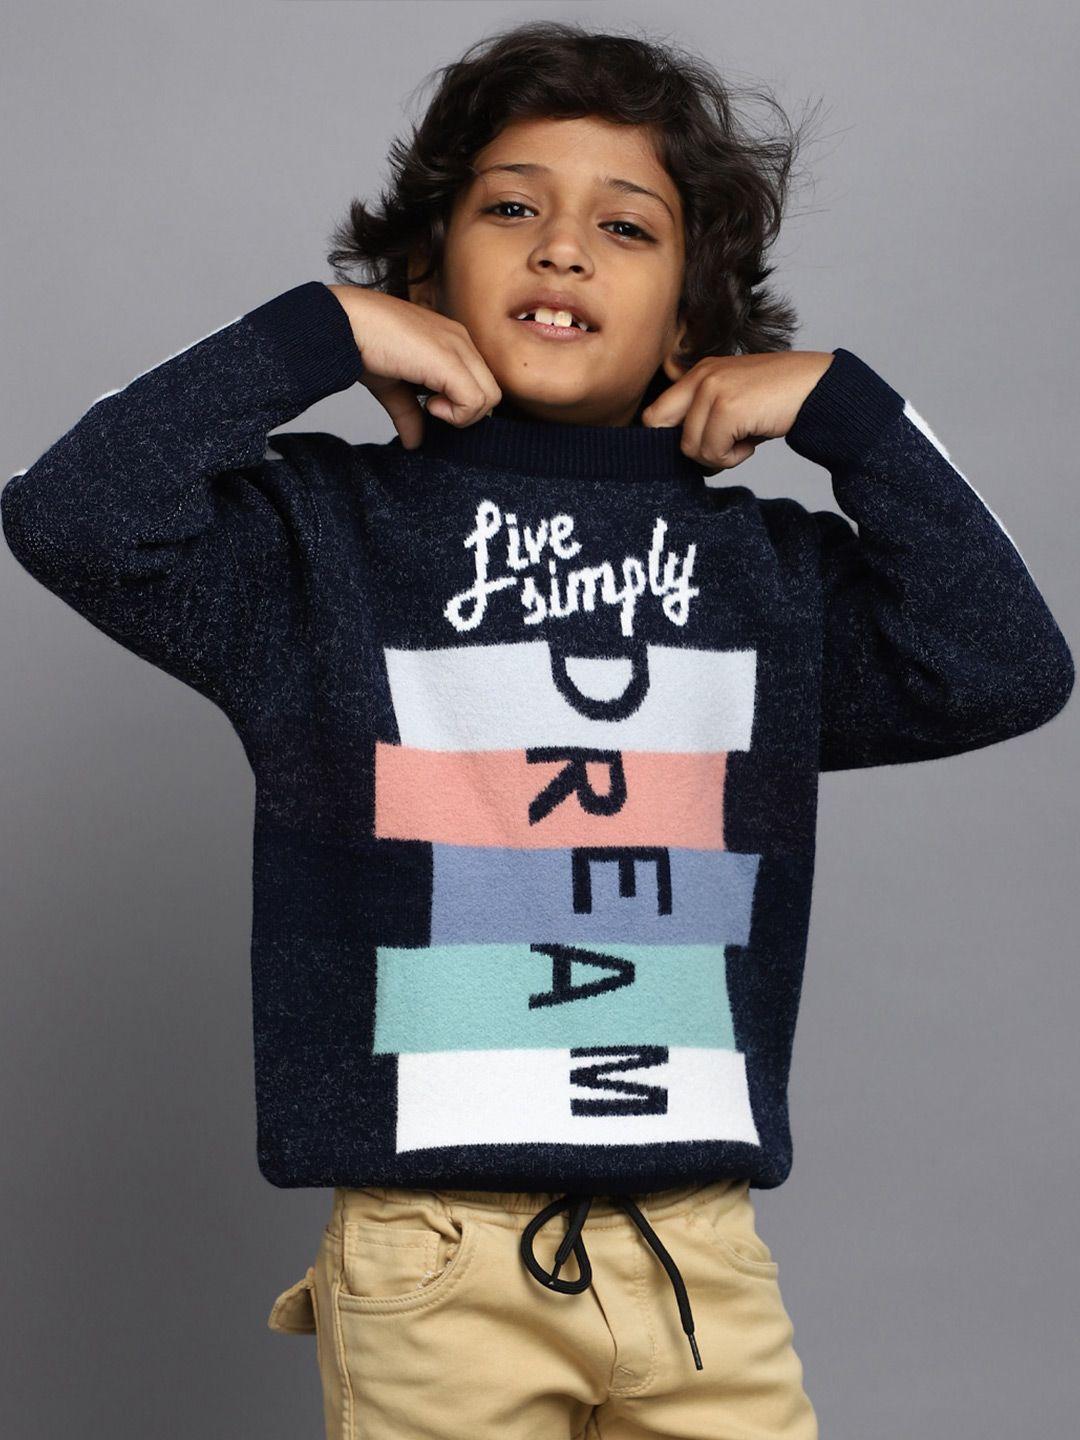 v-mart-boys-typography-printed-woollen-pullover-sweater